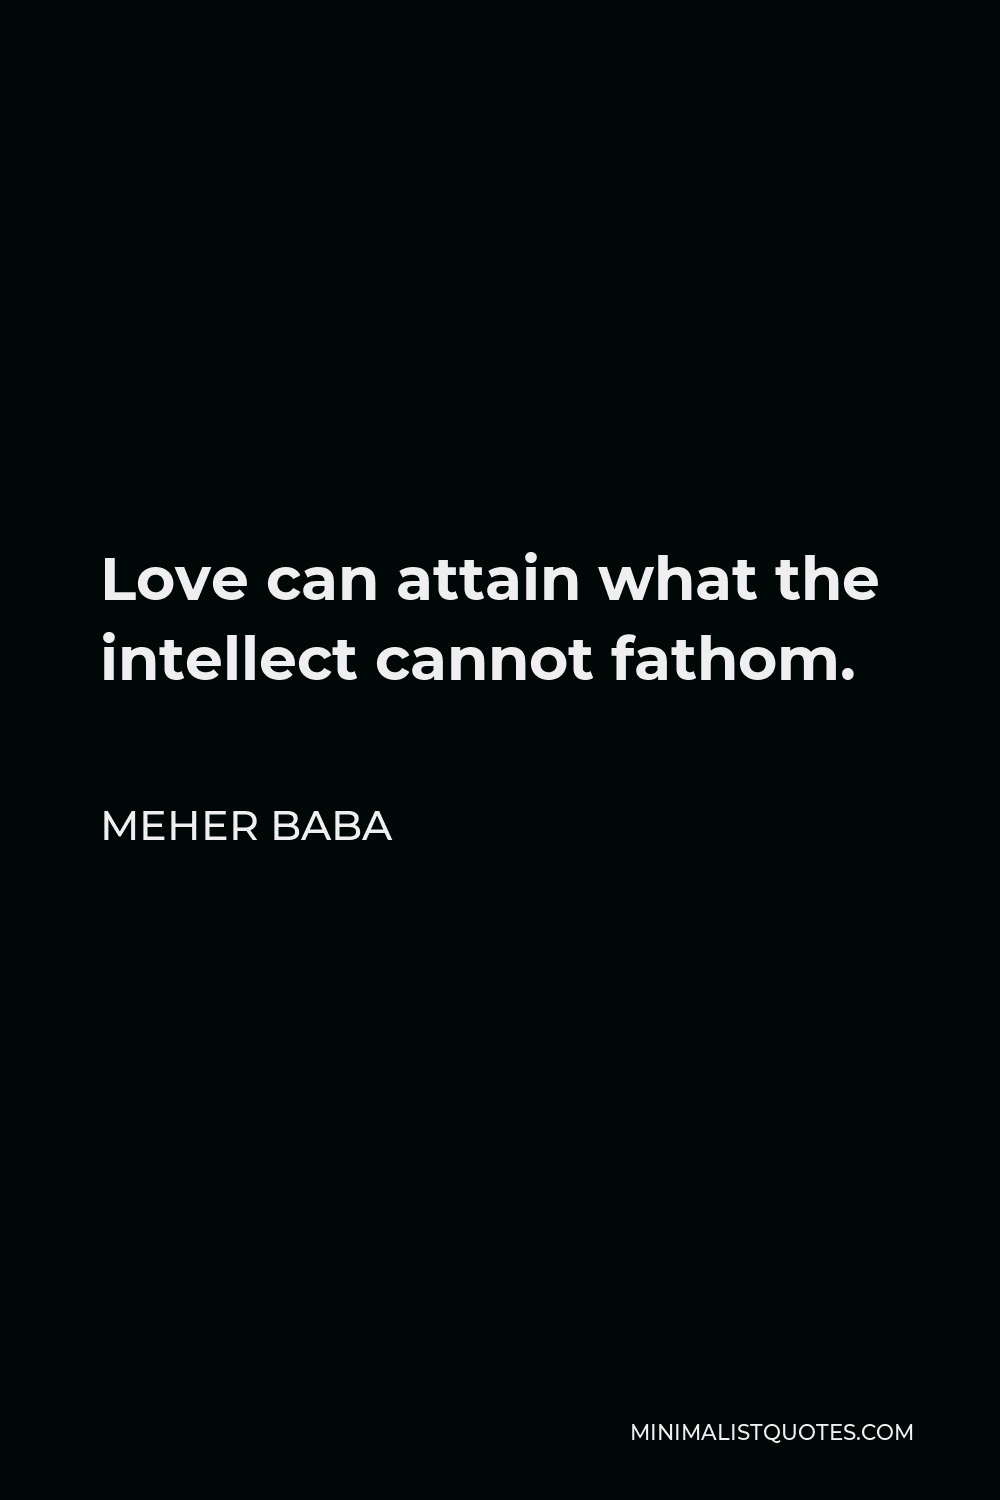 Meher Baba Quote - Love can attain what the intellect cannot fathom.